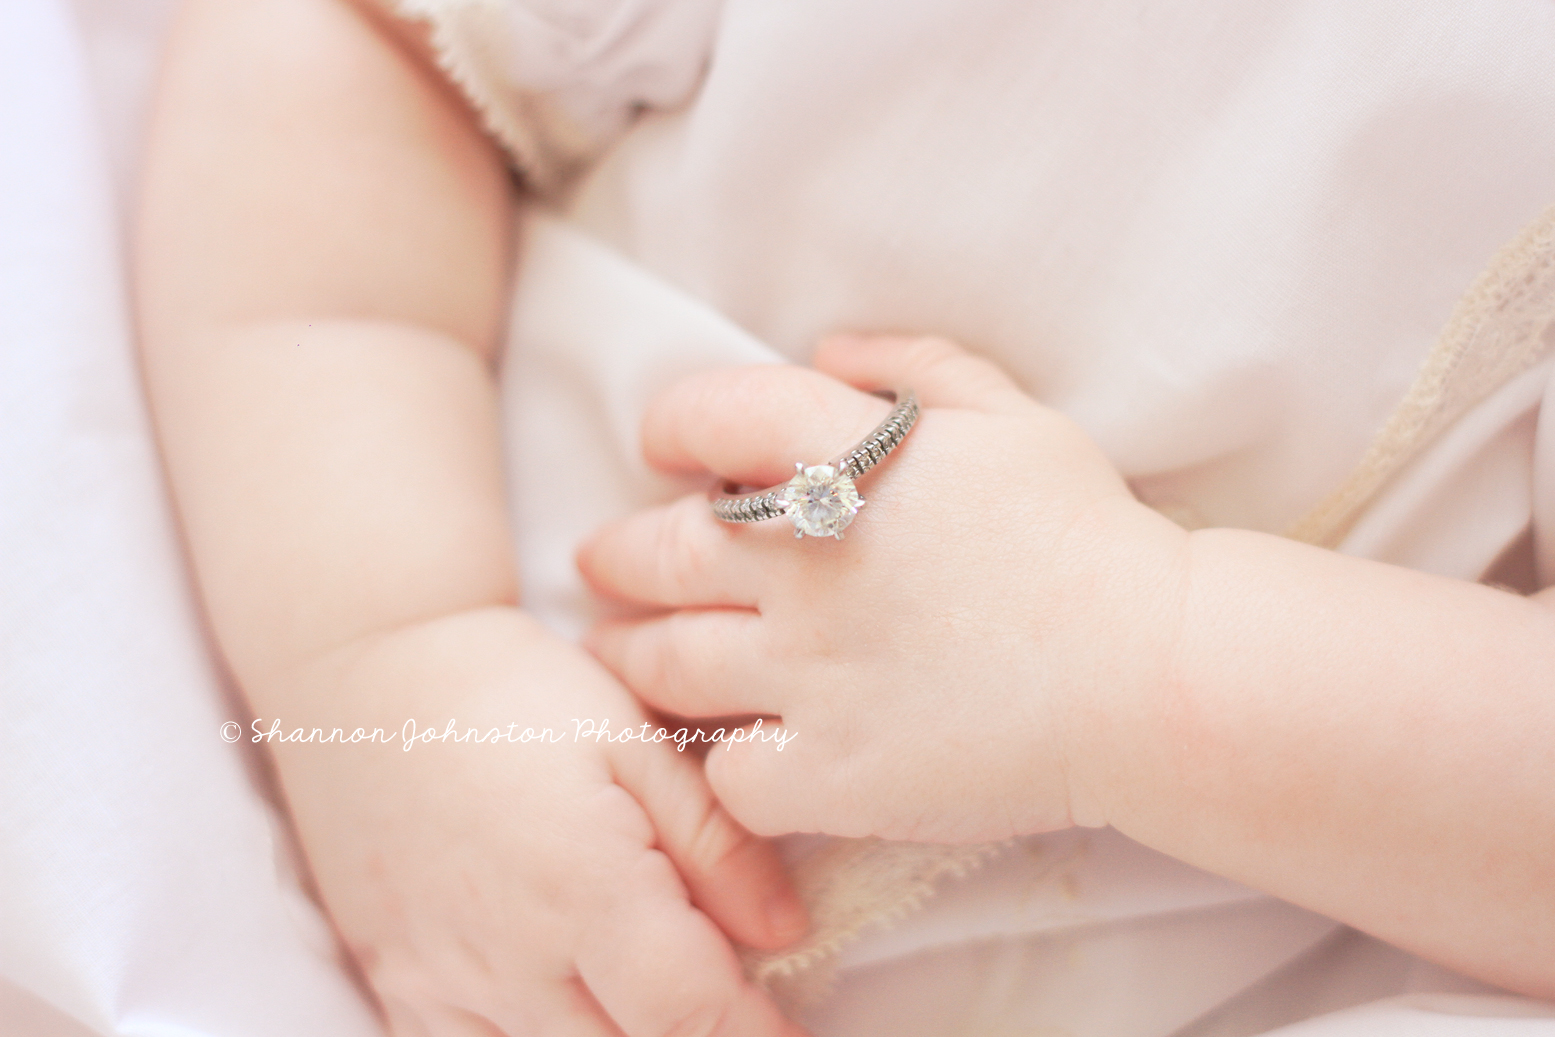 shannonjohsntonphotography1 Edited With Newborn Necessities  